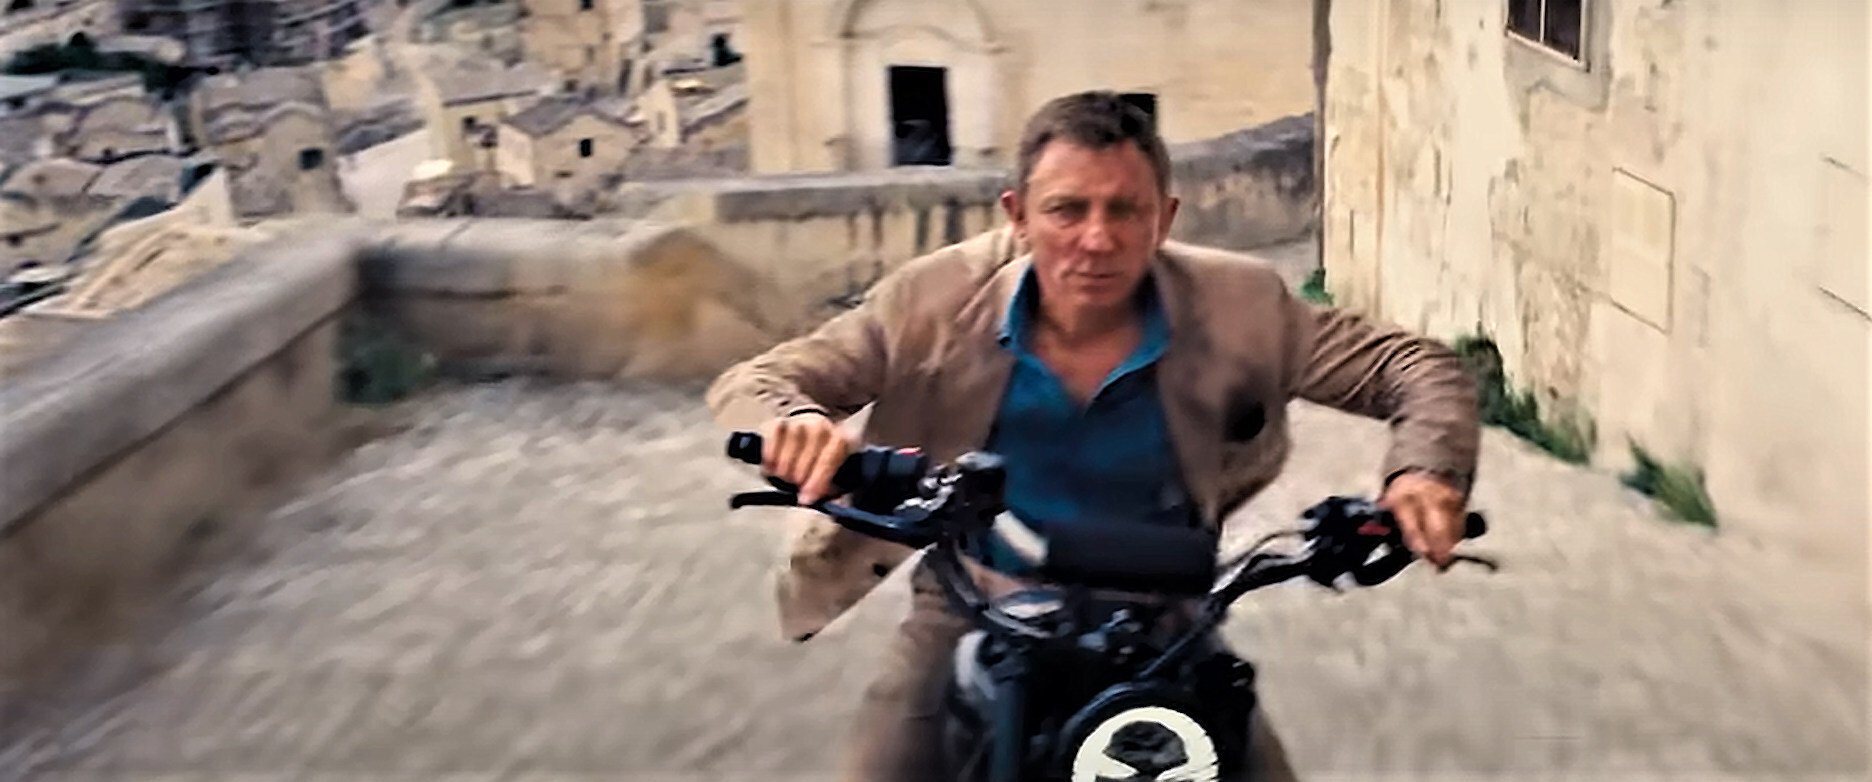 A still of Daniel Craig from a scene in No Time to Die shot in Matera, Italy.